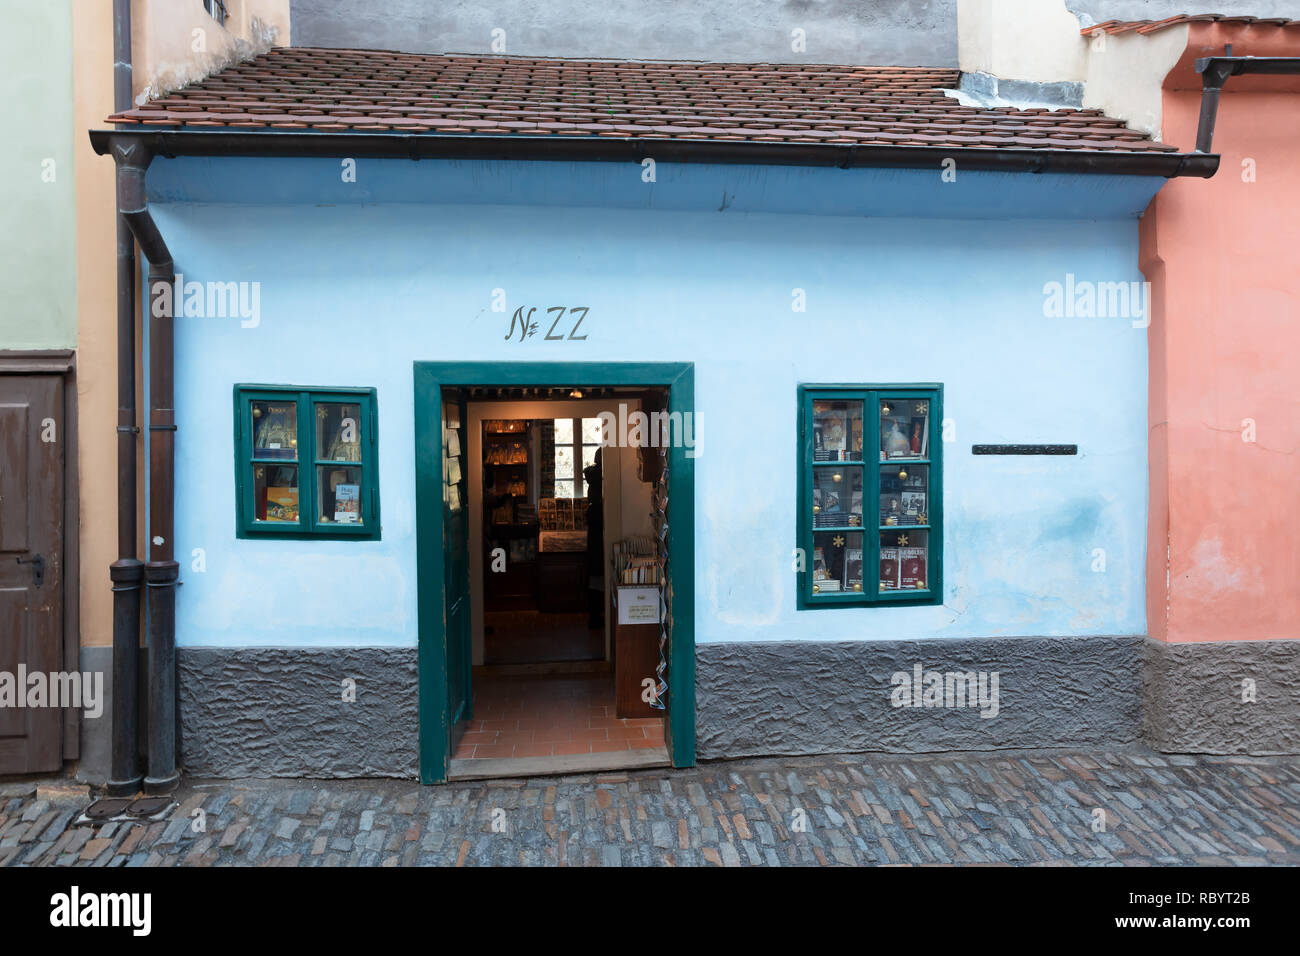 Franz Kafka lived and worked in this tiny brightly painted house on Golden Lane built into the Prague Castle's fortification in 16 century. Stock Photo